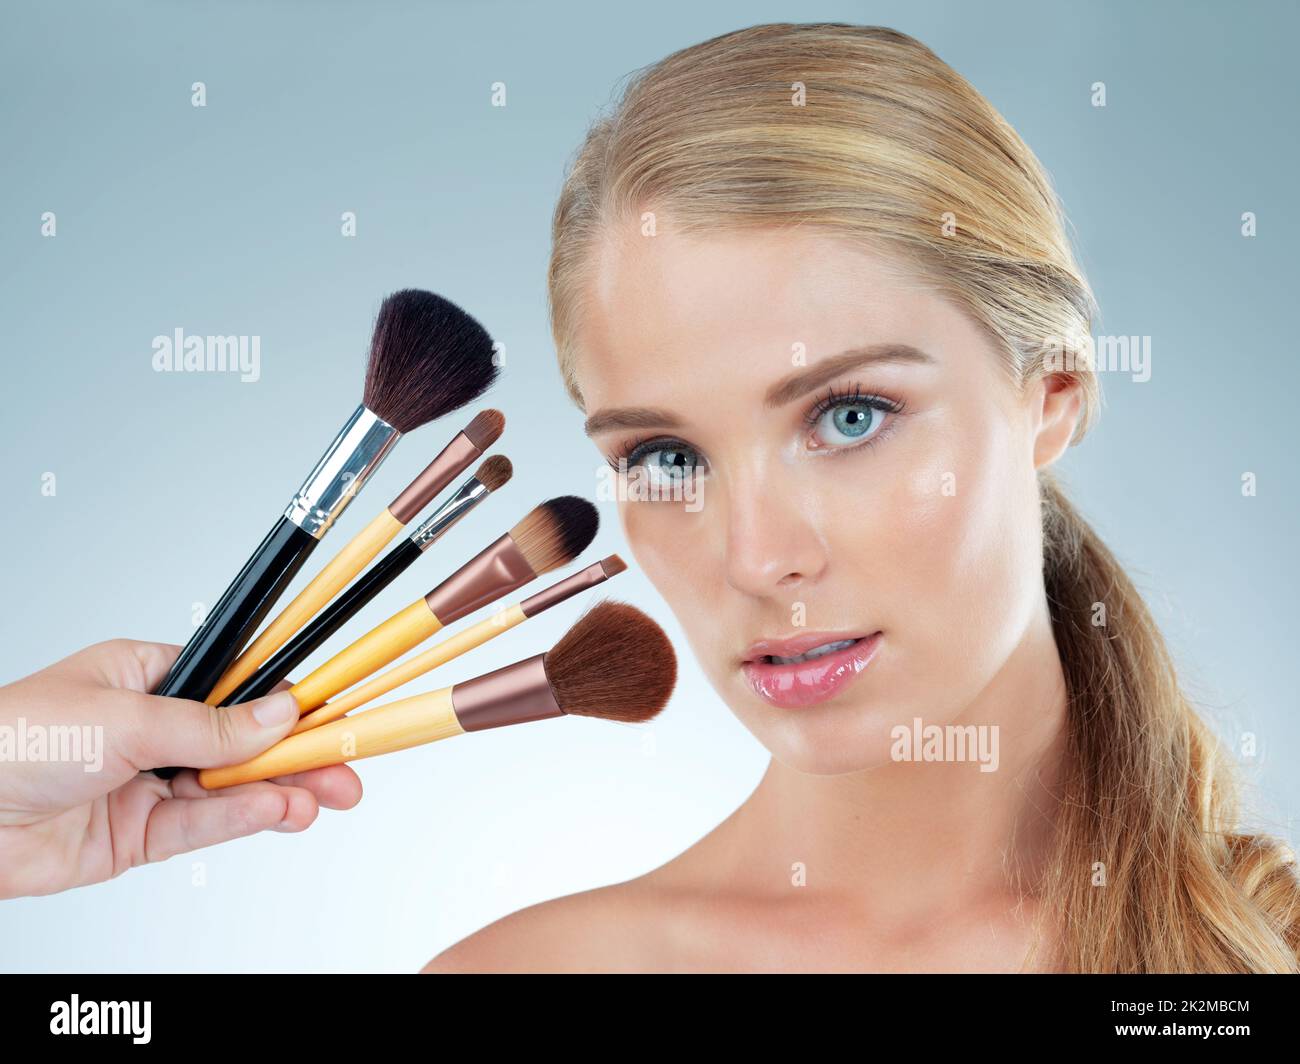 Theres a brush for every occasion. Studio portrait of a beautiful young woman posing with makeup brushes against a blue background. Stock Photo